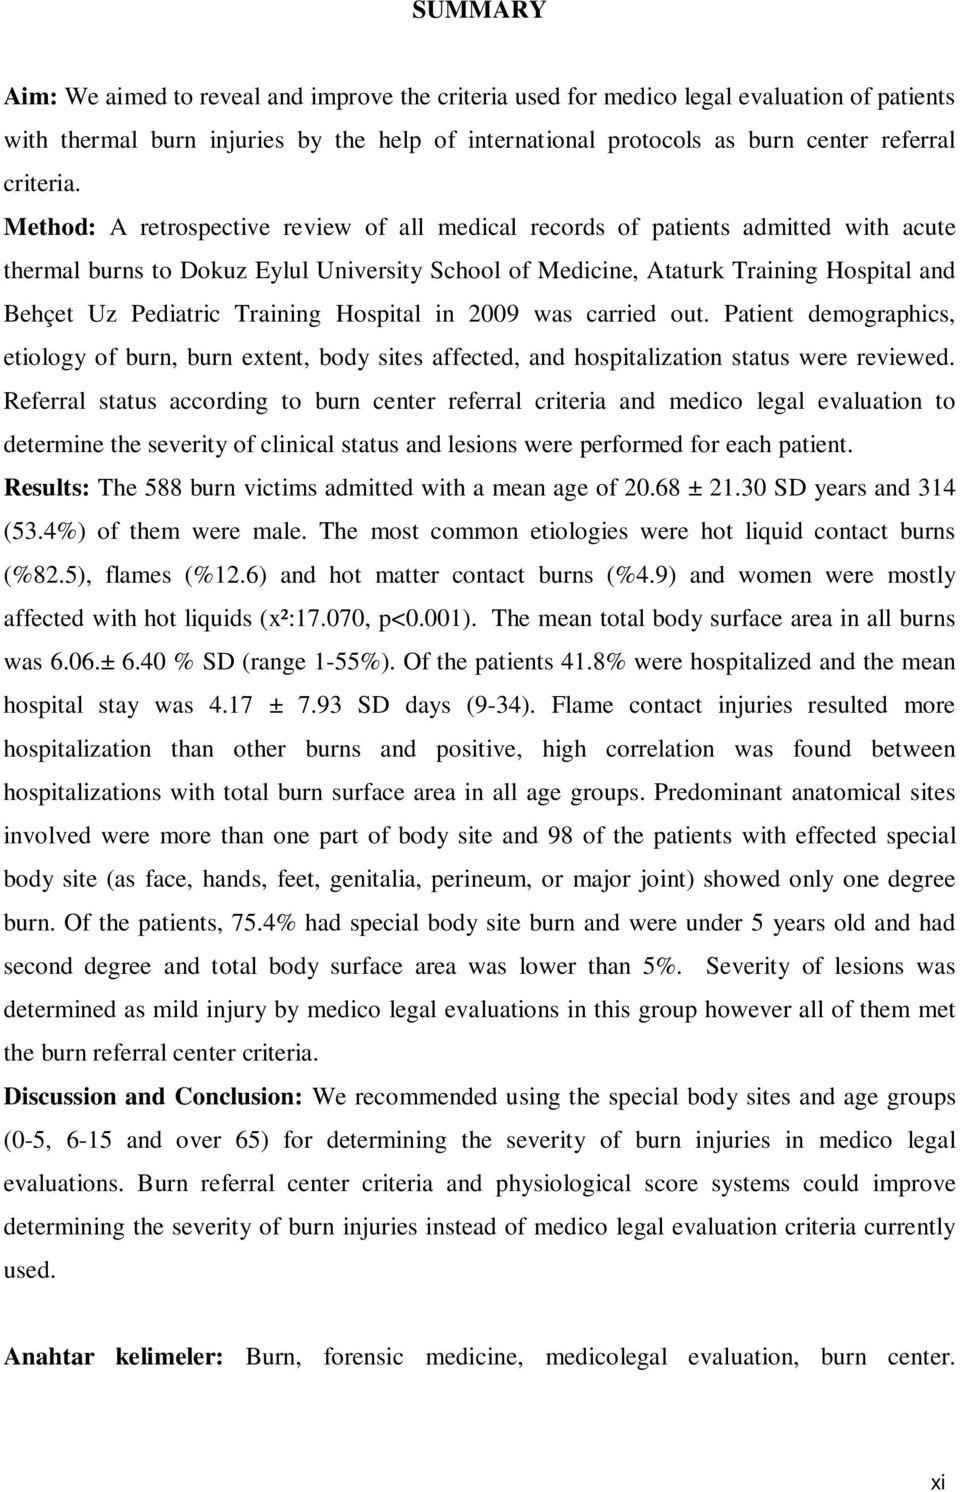 Method: A retrospective review of all medical records of patients admitted with acute thermal burns to Dokuz Eylul University School of Medicine, Ataturk Training Hospital and Behçet Uz Pediatric